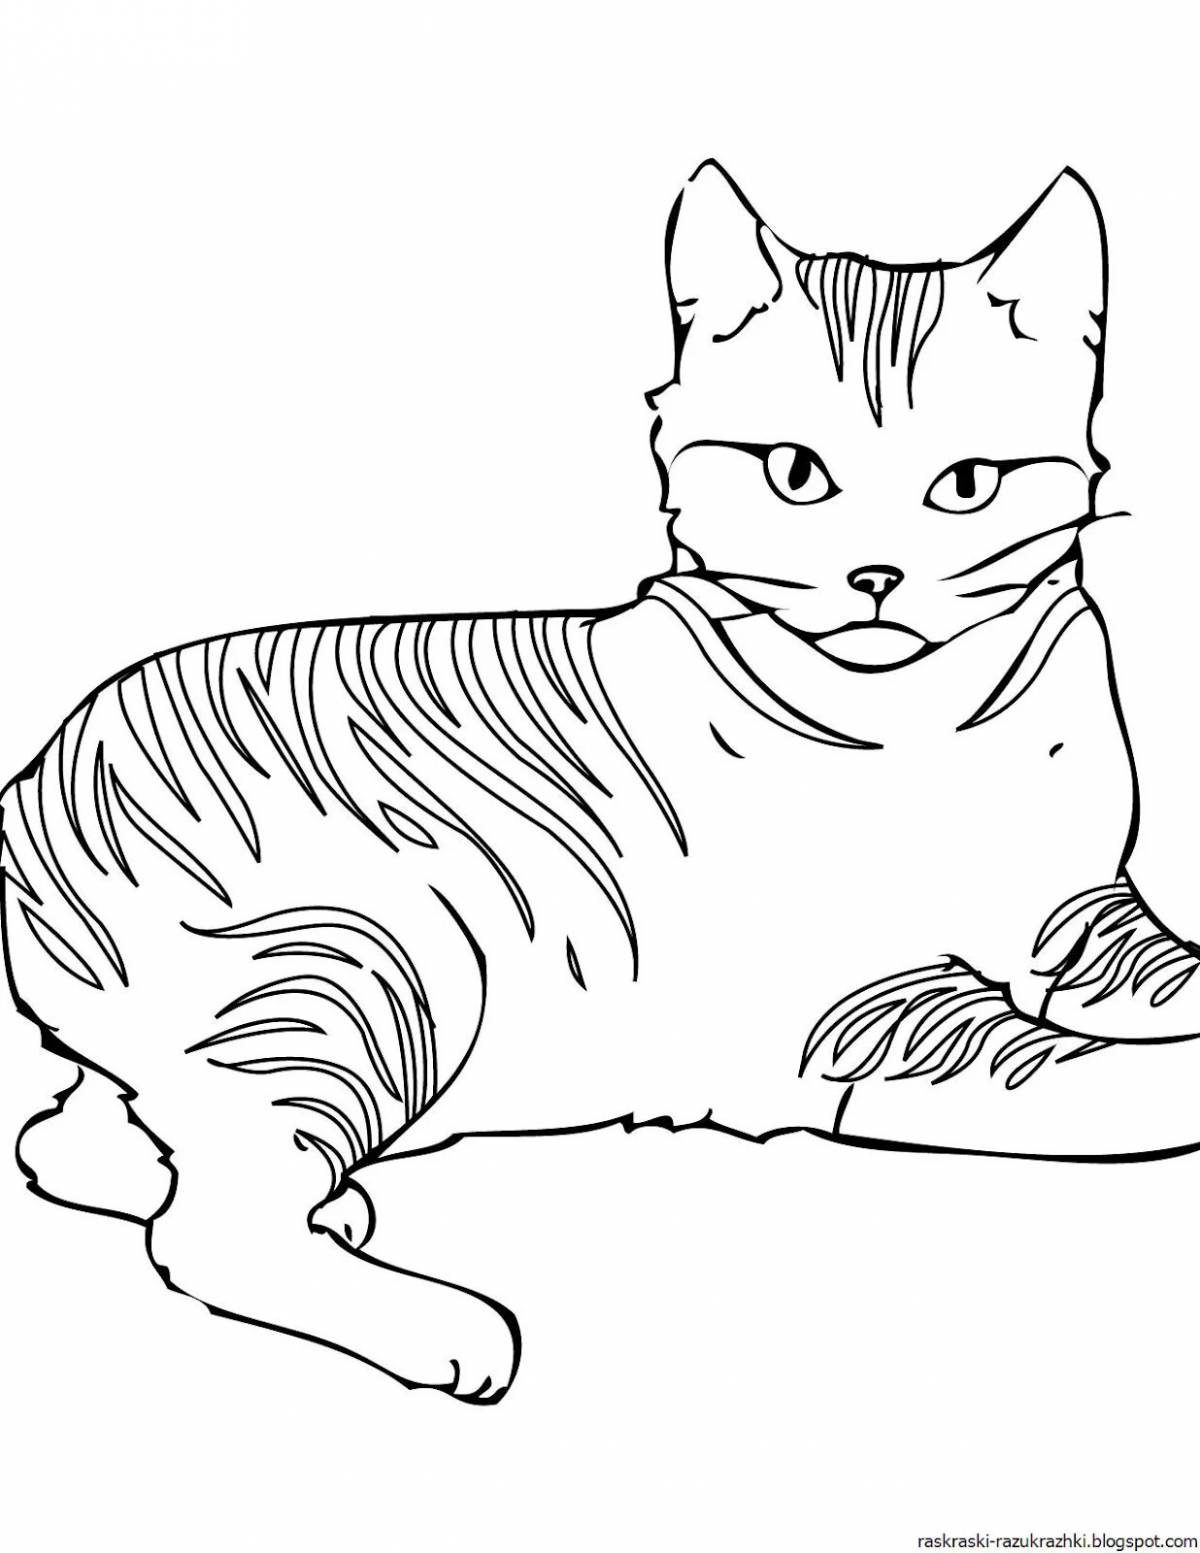 Coloring page fascinating cat